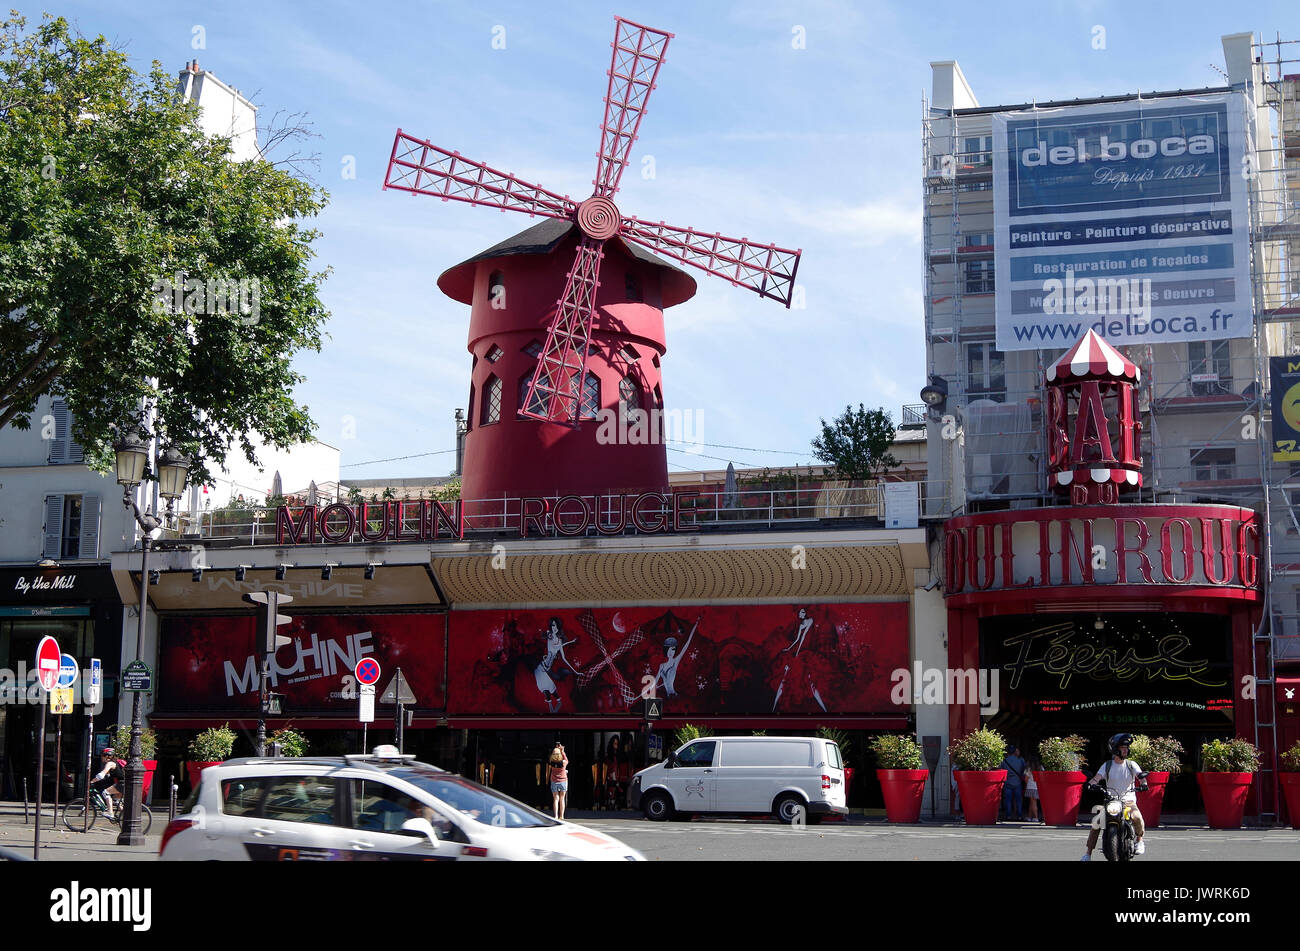 Paris, France, Le Moulin Rouge, cabaret opened in 1889 and still running, though more of a tourist attraction today, Stock Photo